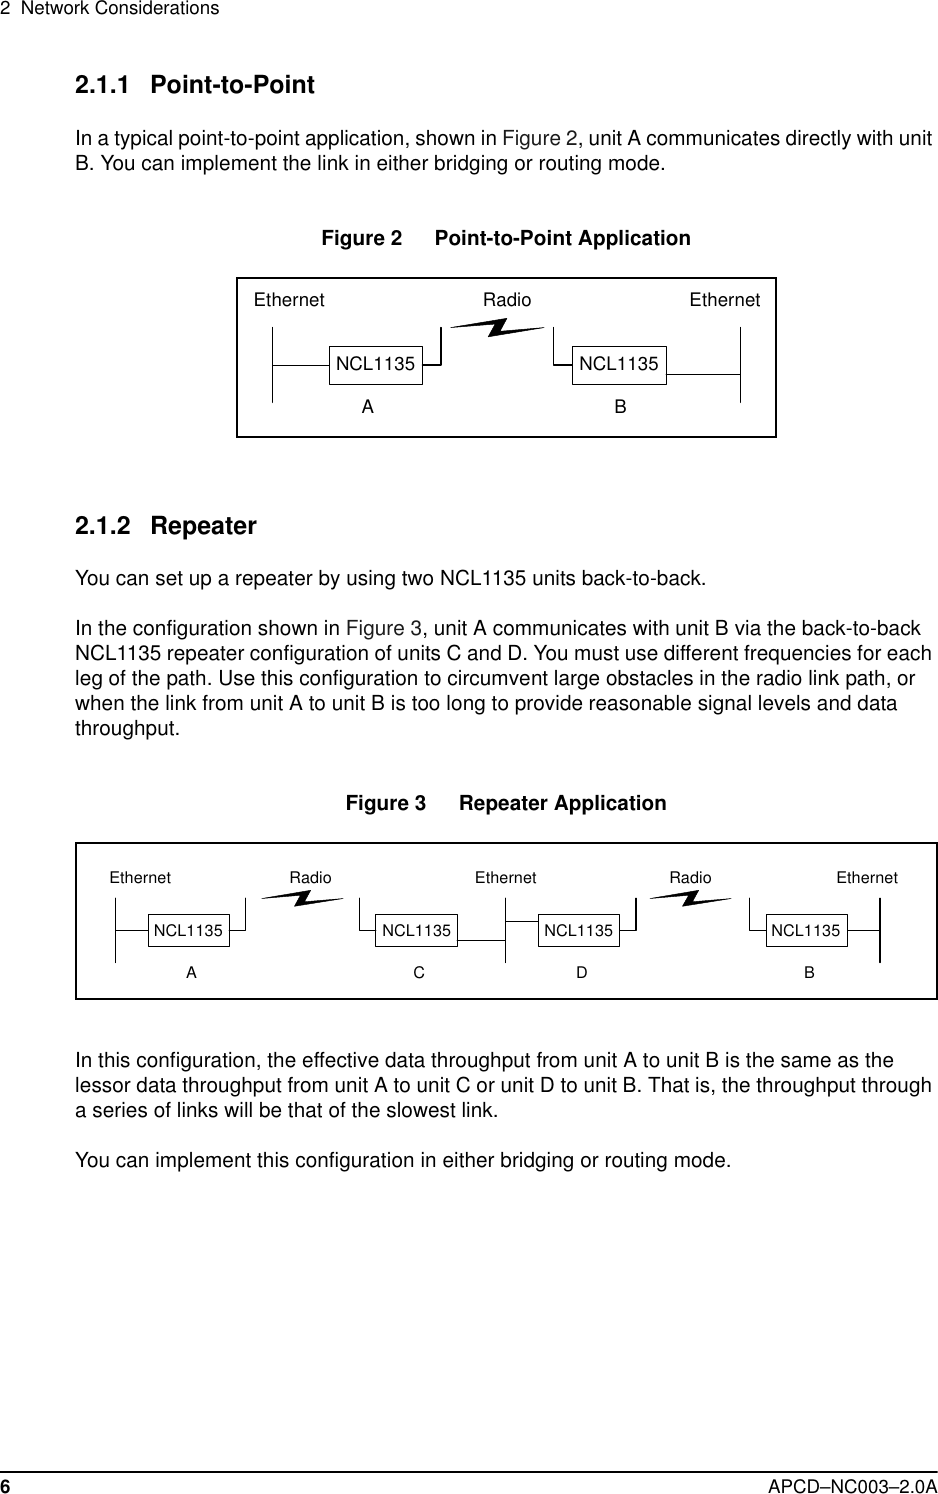 2  Network Considerations6APCD–NC003–2.0A2.1.1 Point-to-Point In a typical point-to-point application, shown in Figure 2, unit A communicates directly with unit B. You can implement the link in either bridging or routing mode.Figure 2   Point-to-Point Application 2.1.2 Repeater You can set up a repeater by using two NCL1135 units back-to-back. In the configuration shown in Figure 3, unit A communicates with unit B via the back-to-back NCL1135 repeater configuration of units C and D. You must use different frequencies for each leg of the path. Use this configuration to circumvent large obstacles in the radio link path, or when the link from unit A to unit B is too long to provide reasonable signal levels and data throughput. Figure 3   Repeater ApplicationIn this configuration, the effective data throughput from unit A to unit B is the same as the lessor data throughput from unit A to unit C or unit D to unit B. That is, the throughput through a series of links will be that of the slowest link.You can implement this configuration in either bridging or routing mode.NCL1135 NCL1135ABEthernet EthernetRadioBNCL1135Ethernet Radio Ethernet EthernetRadioACDNCL1135 NCL1135 NCL1135